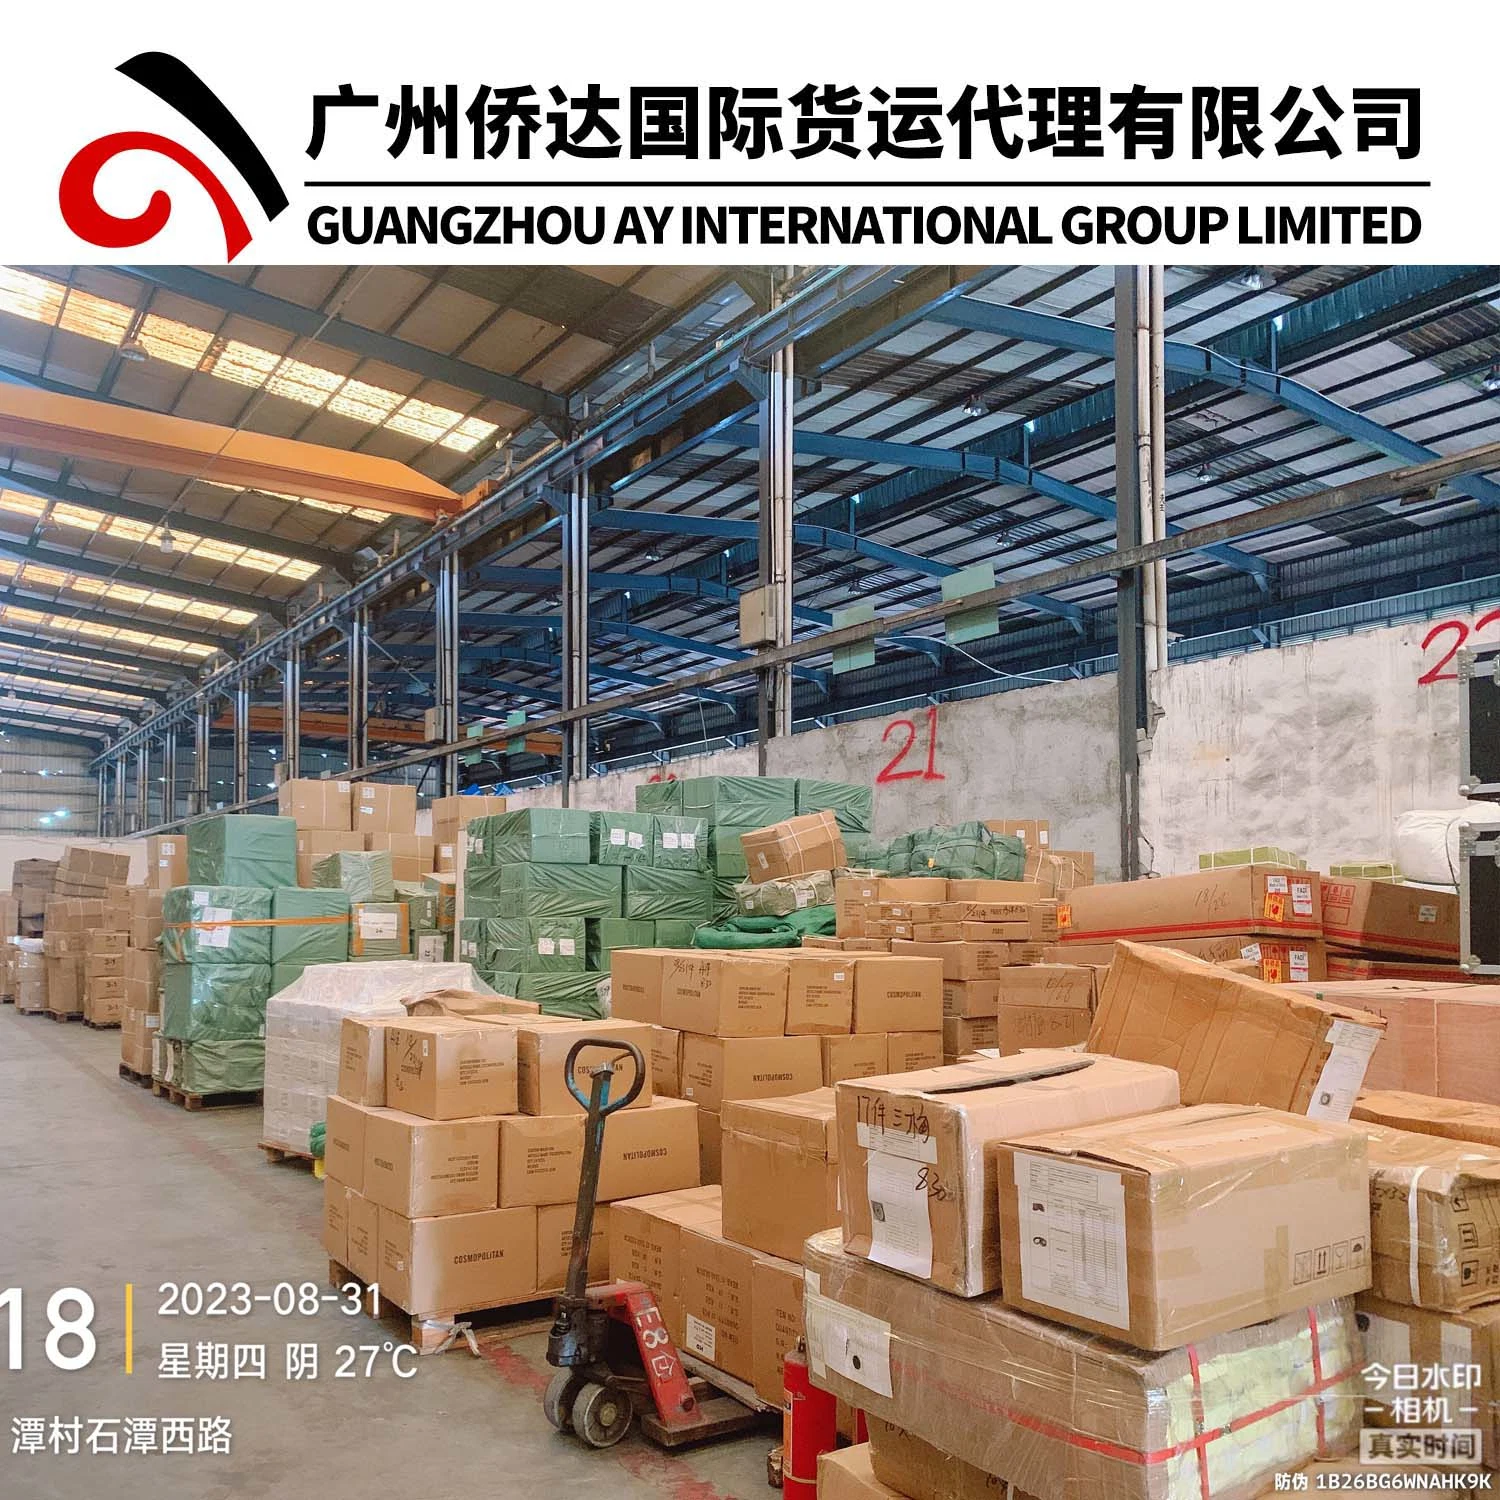 1688 Shipping Agent From China to All Over World by Air Freight/Sea Freight/Railway Freight/Road Freight